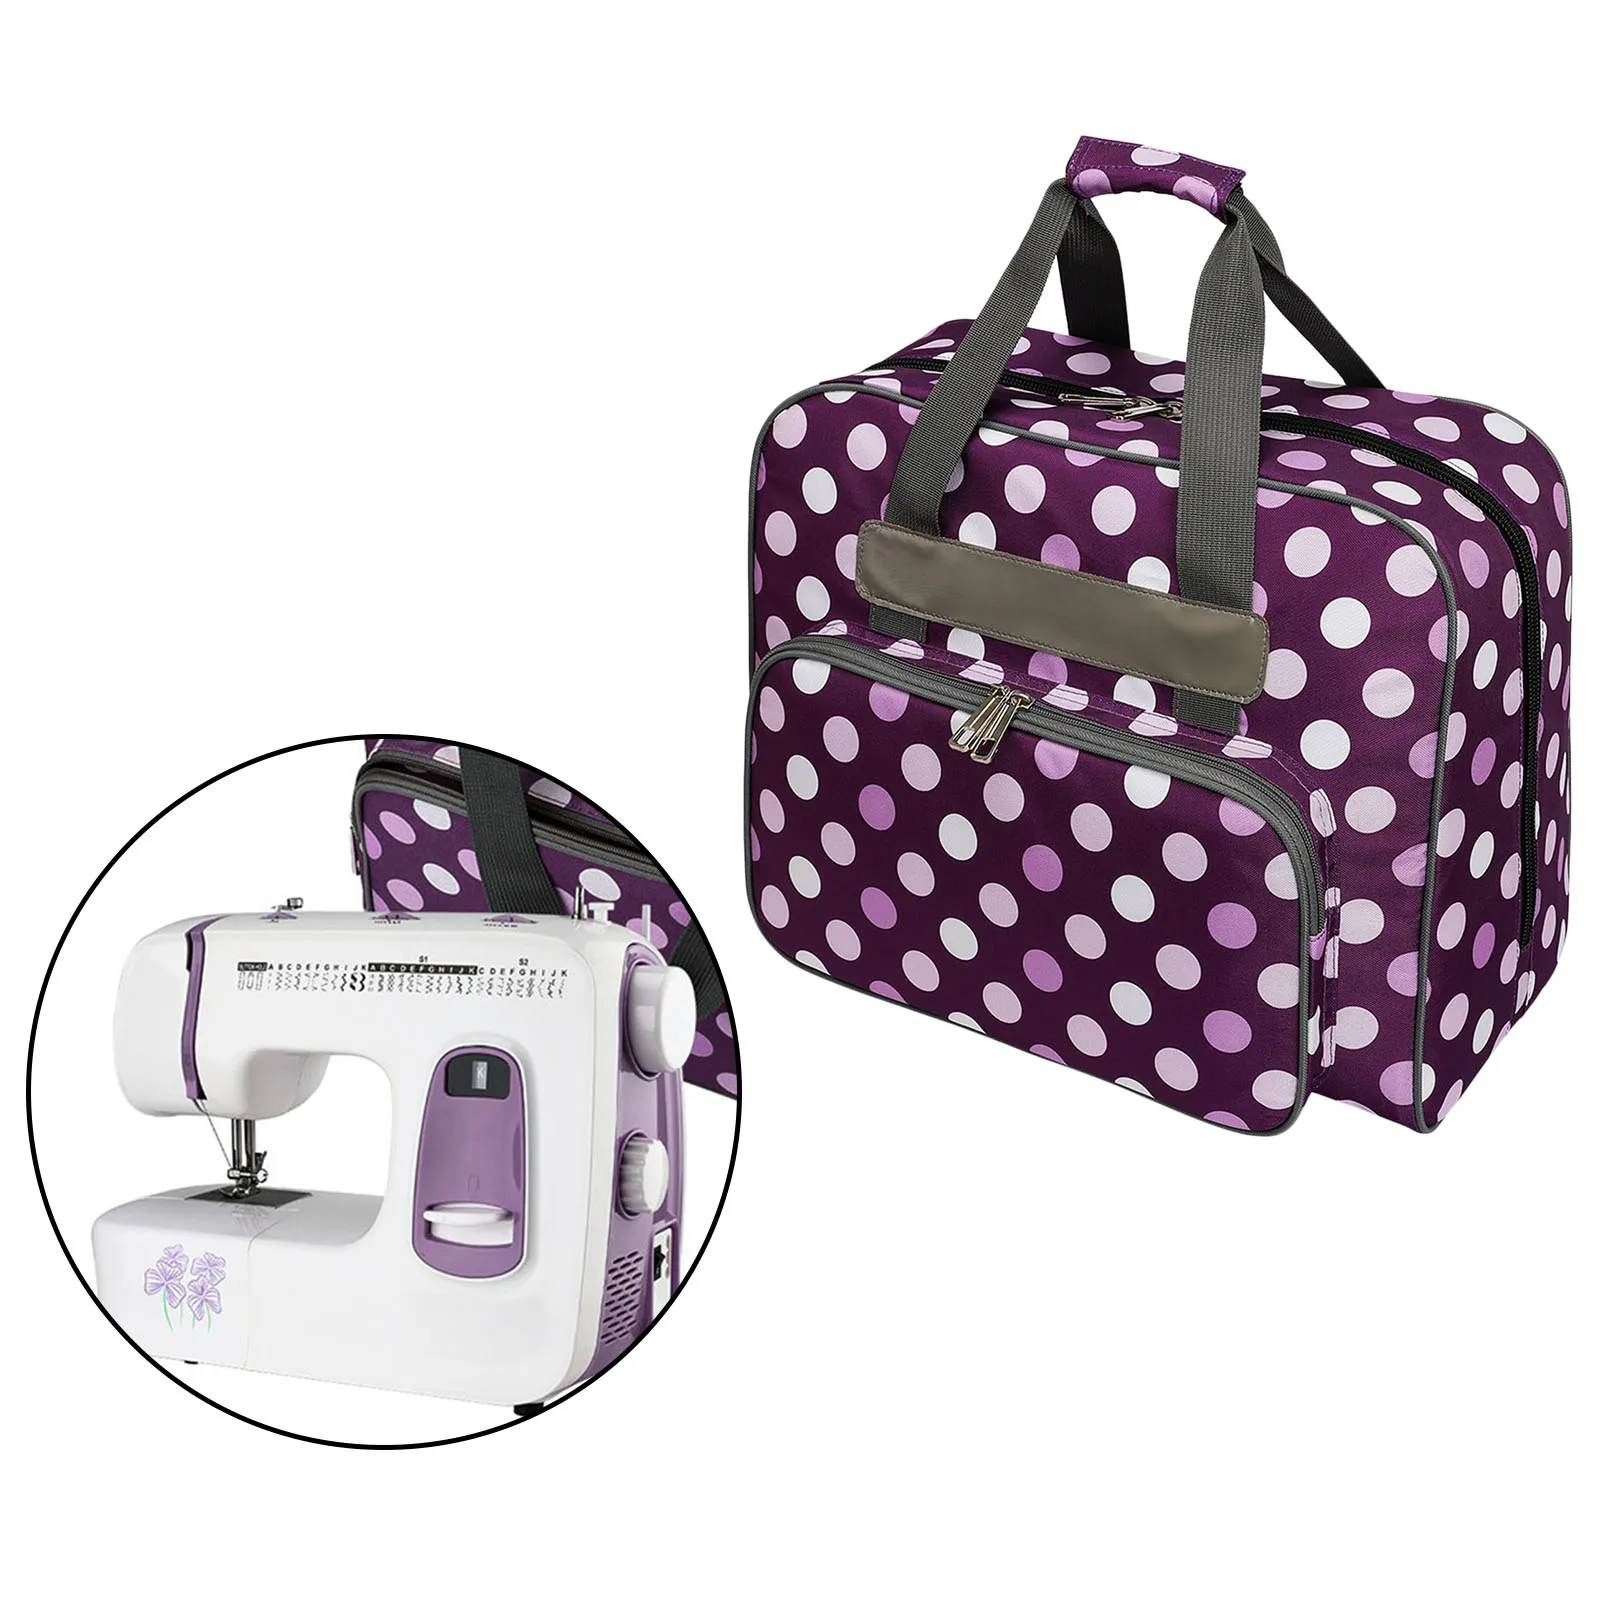 Sewing Machine Bag Large Capacity Dot Pattern Fashion Useful Storage Bags Oxford Cloth Home Use Tote Multi-functional